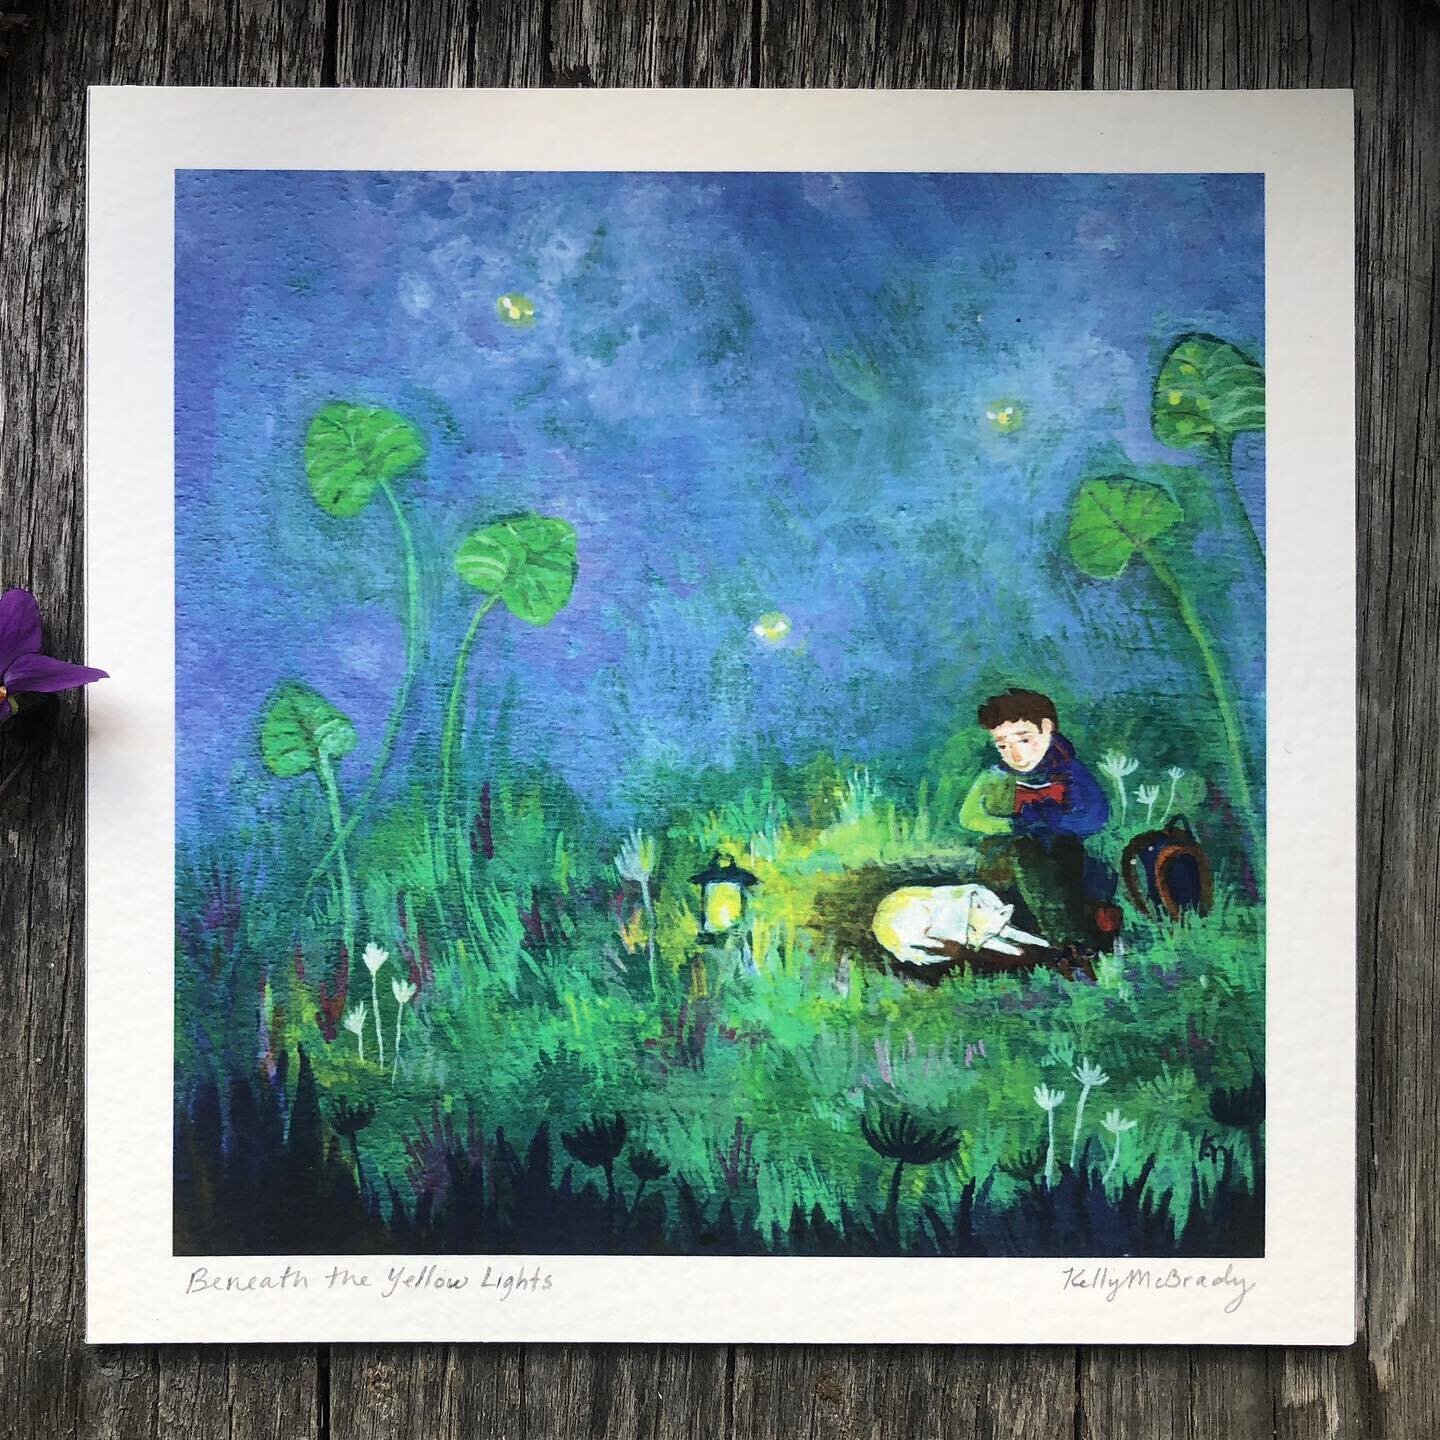 I was thinking of where I&rsquo;d like to be the most, with my dear fur friend, reading books with only a glowing lantern and fireflies to light up the pages. &ldquo;Beneath the Yellow Lights&rdquo; mini print is now up on my Etsy shop 🐶☘️✨
.
.
.
.
